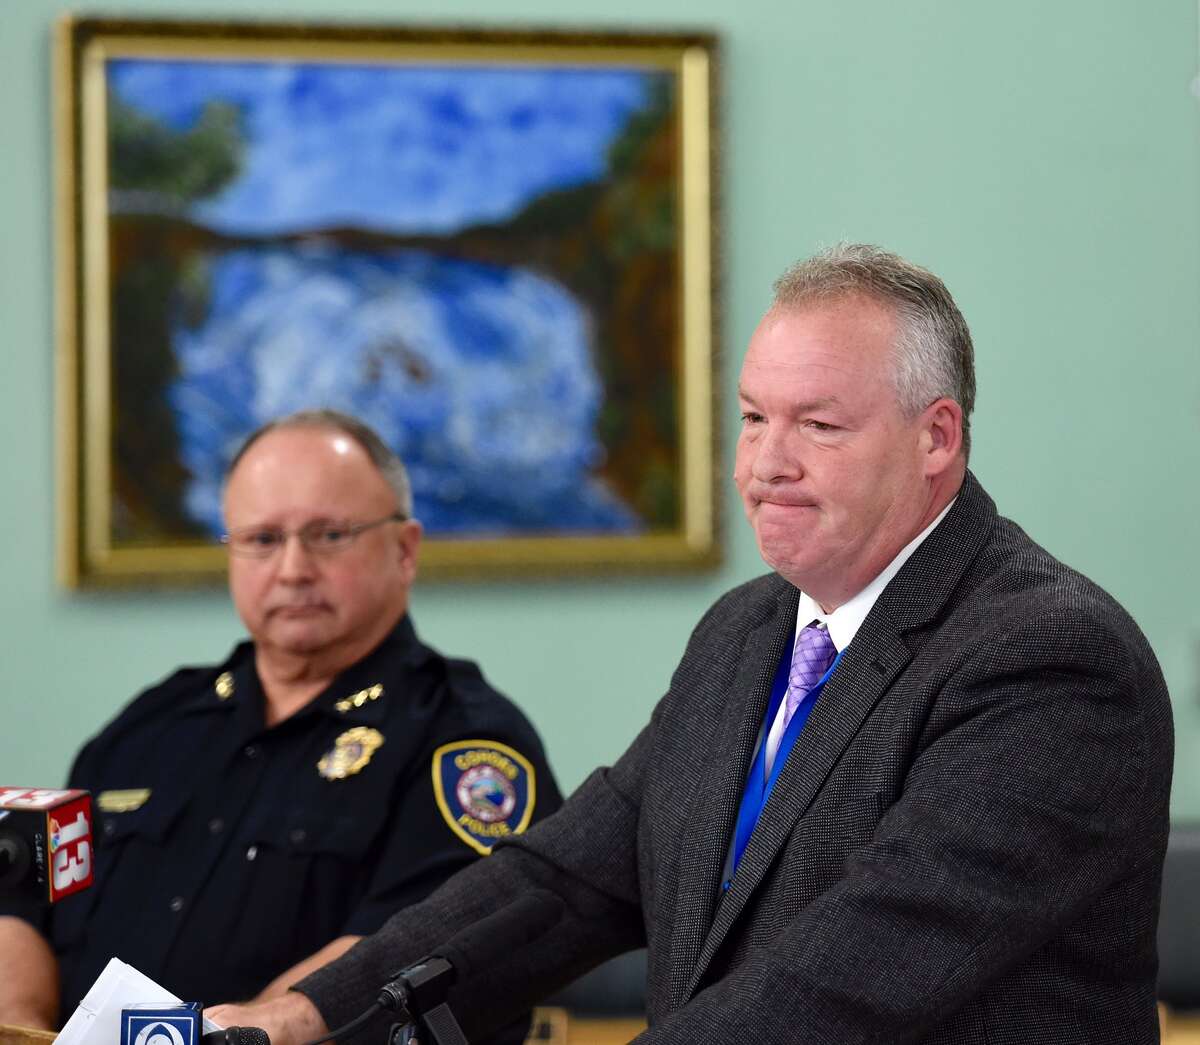 Cohoes Mayor Shawn Morse, right, and Police Chief William Heslin hold back emotion while talking during a news conference Friday, June 17, 2016, after a 16-year-old girl was killed crossing Interstate 787 on Thursday night. 